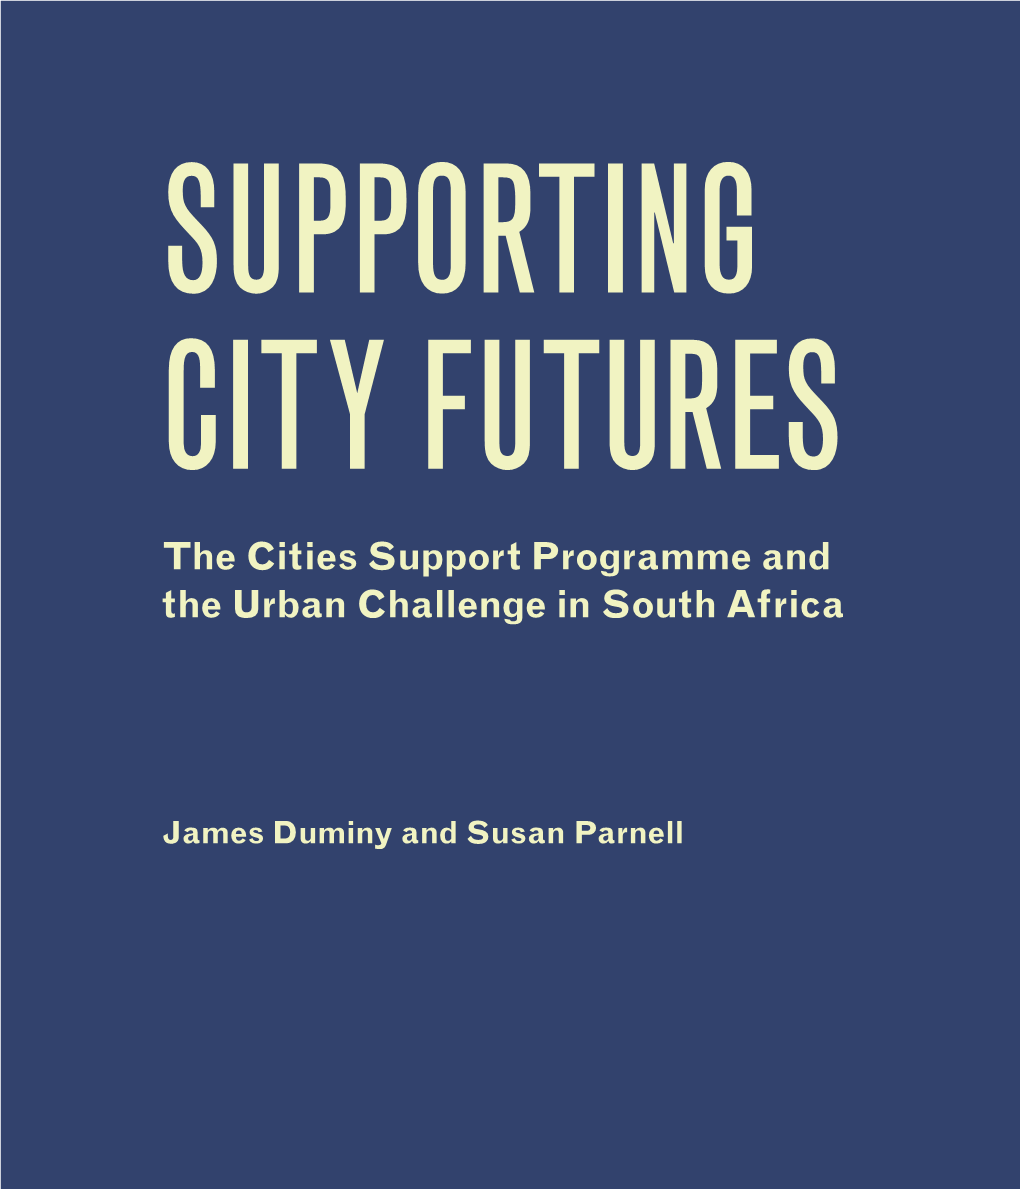 The Cities Support Programme and the Urban Challenge in South Africa